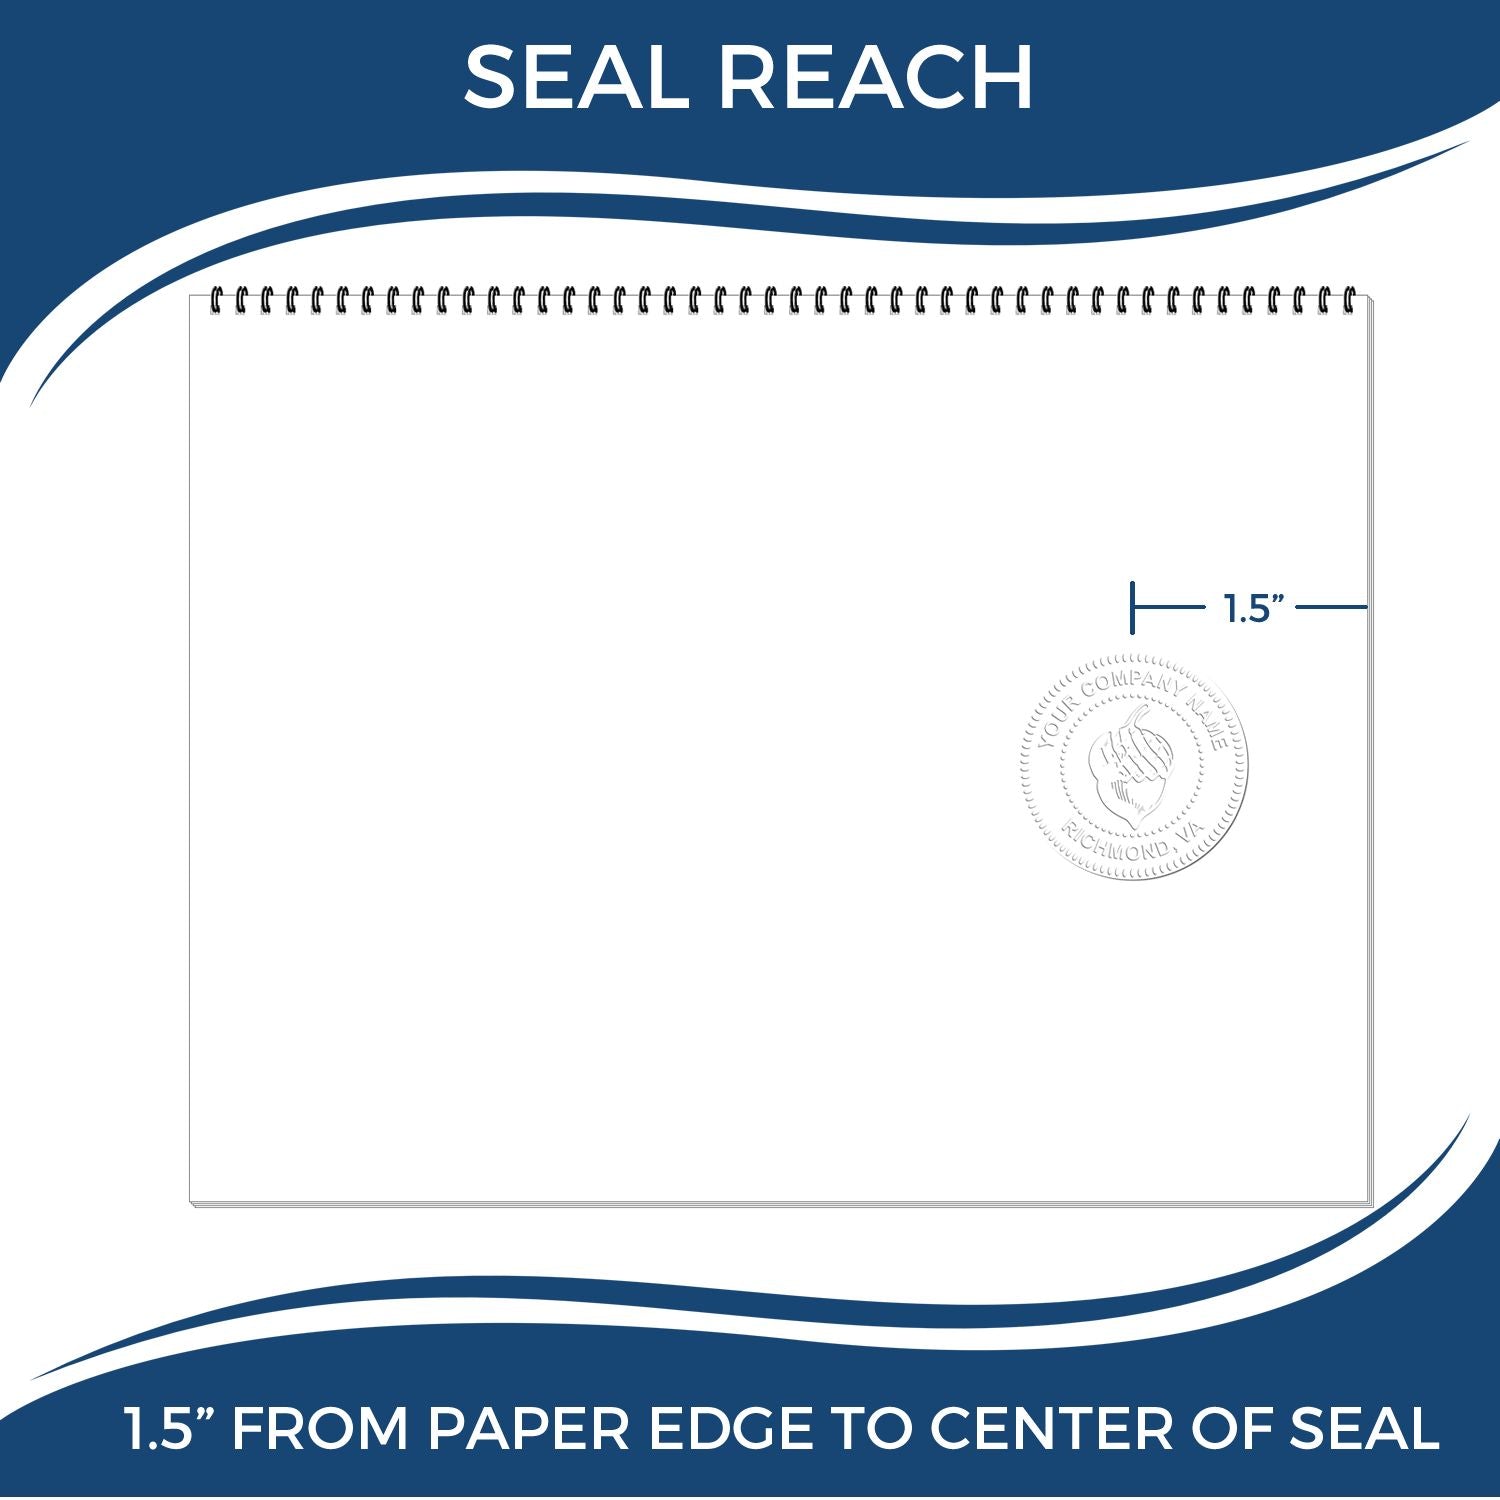 An infographic showing the seal reach which is represented by a ruler and a miniature seal image of the Handheld Wisconsin Professional Engineer Embosser